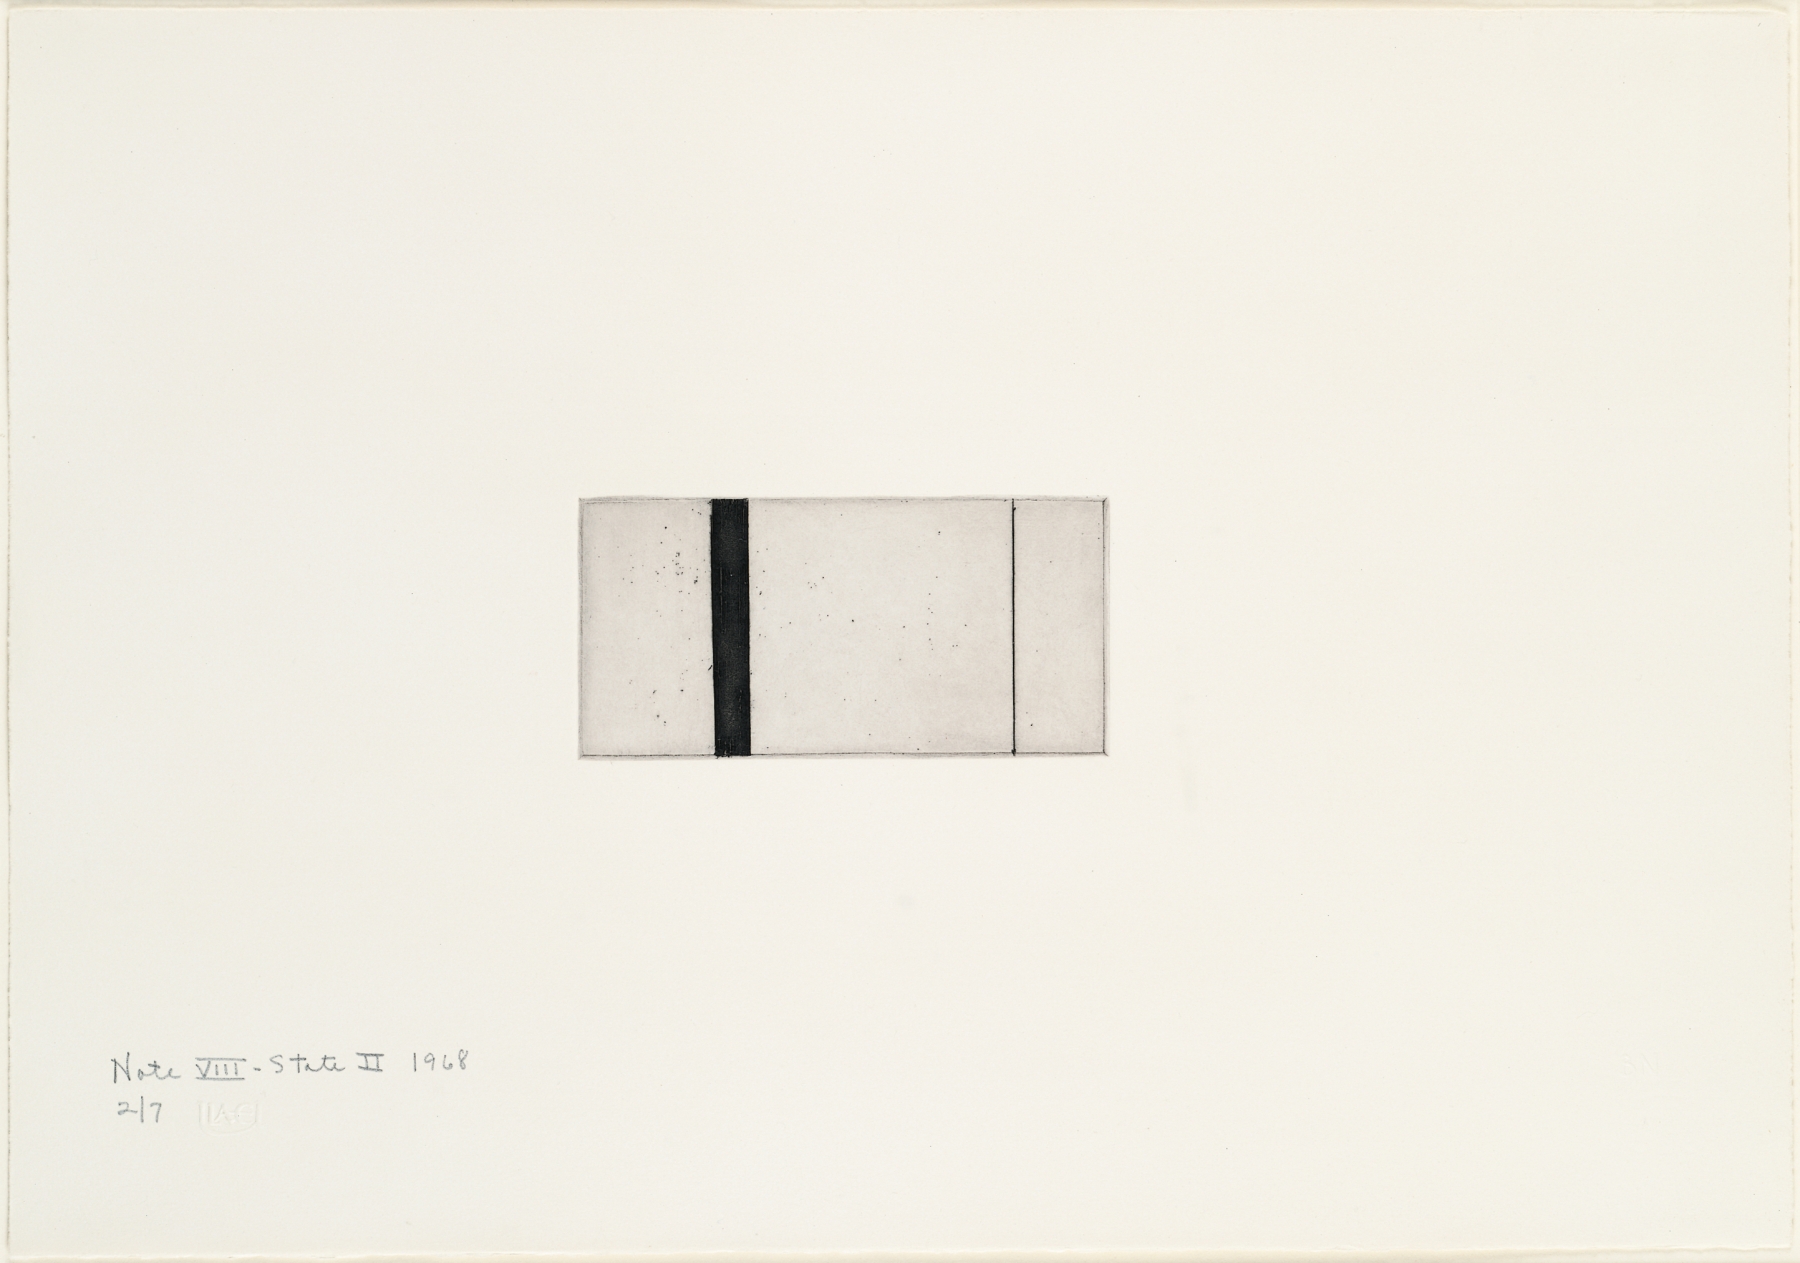 Barnett Newman, Note VIII (State II), 1968. Etching, printed in black on Italia white wove paper, 2 15/16 x 5 15/16 inches, Plate; 14 x 19 7/8 inches, Sheet. Edition of 7. Private Collection.